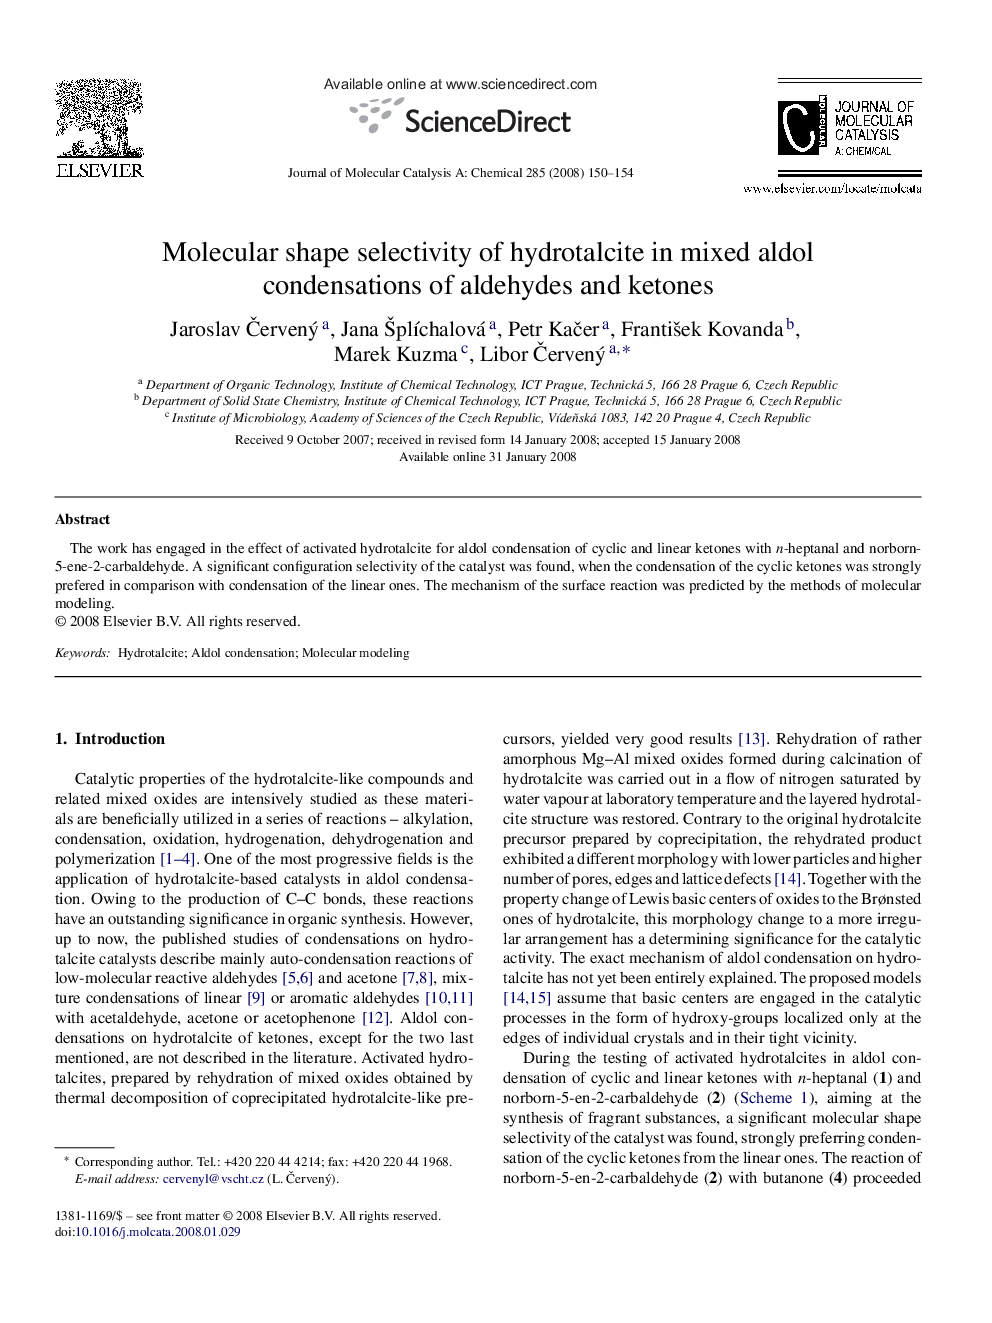 Molecular shape selectivity of hydrotalcite in mixed aldol condensations of aldehydes and ketones